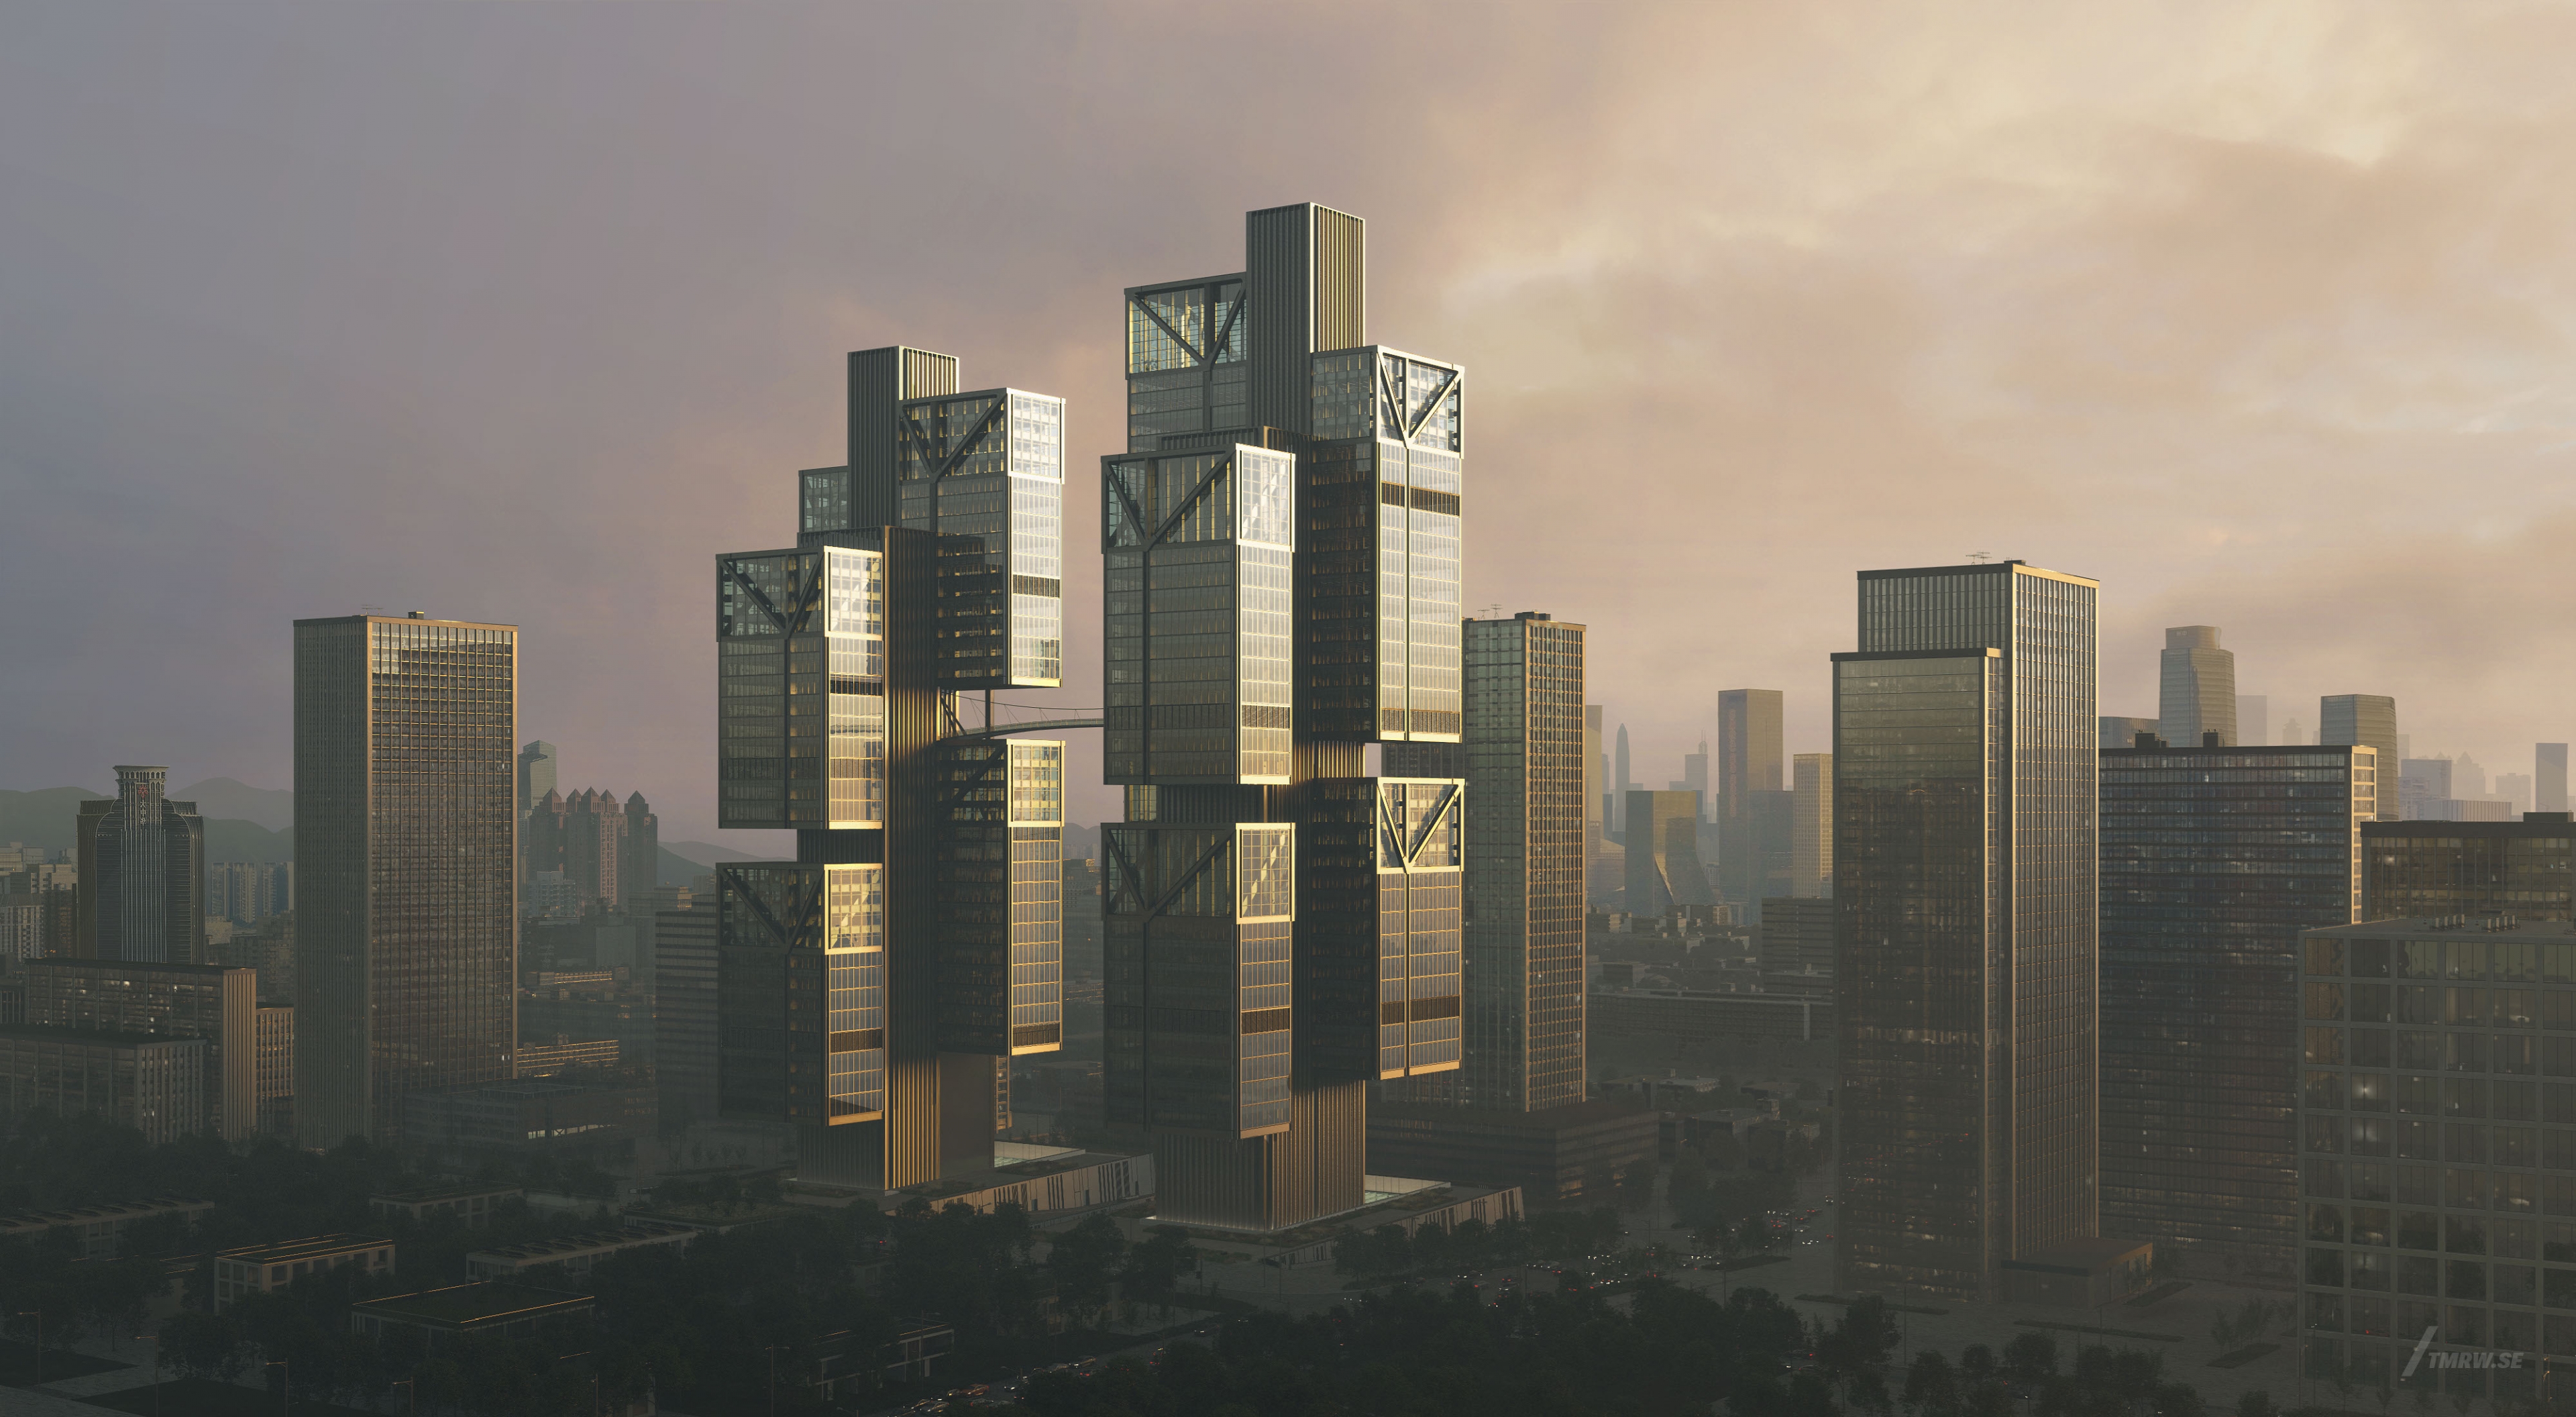 Architectural visualization of DJI for Foster + Partners. A image of the exterior of a two skyscaper office buildings infornt at dusk from semi aerial view.